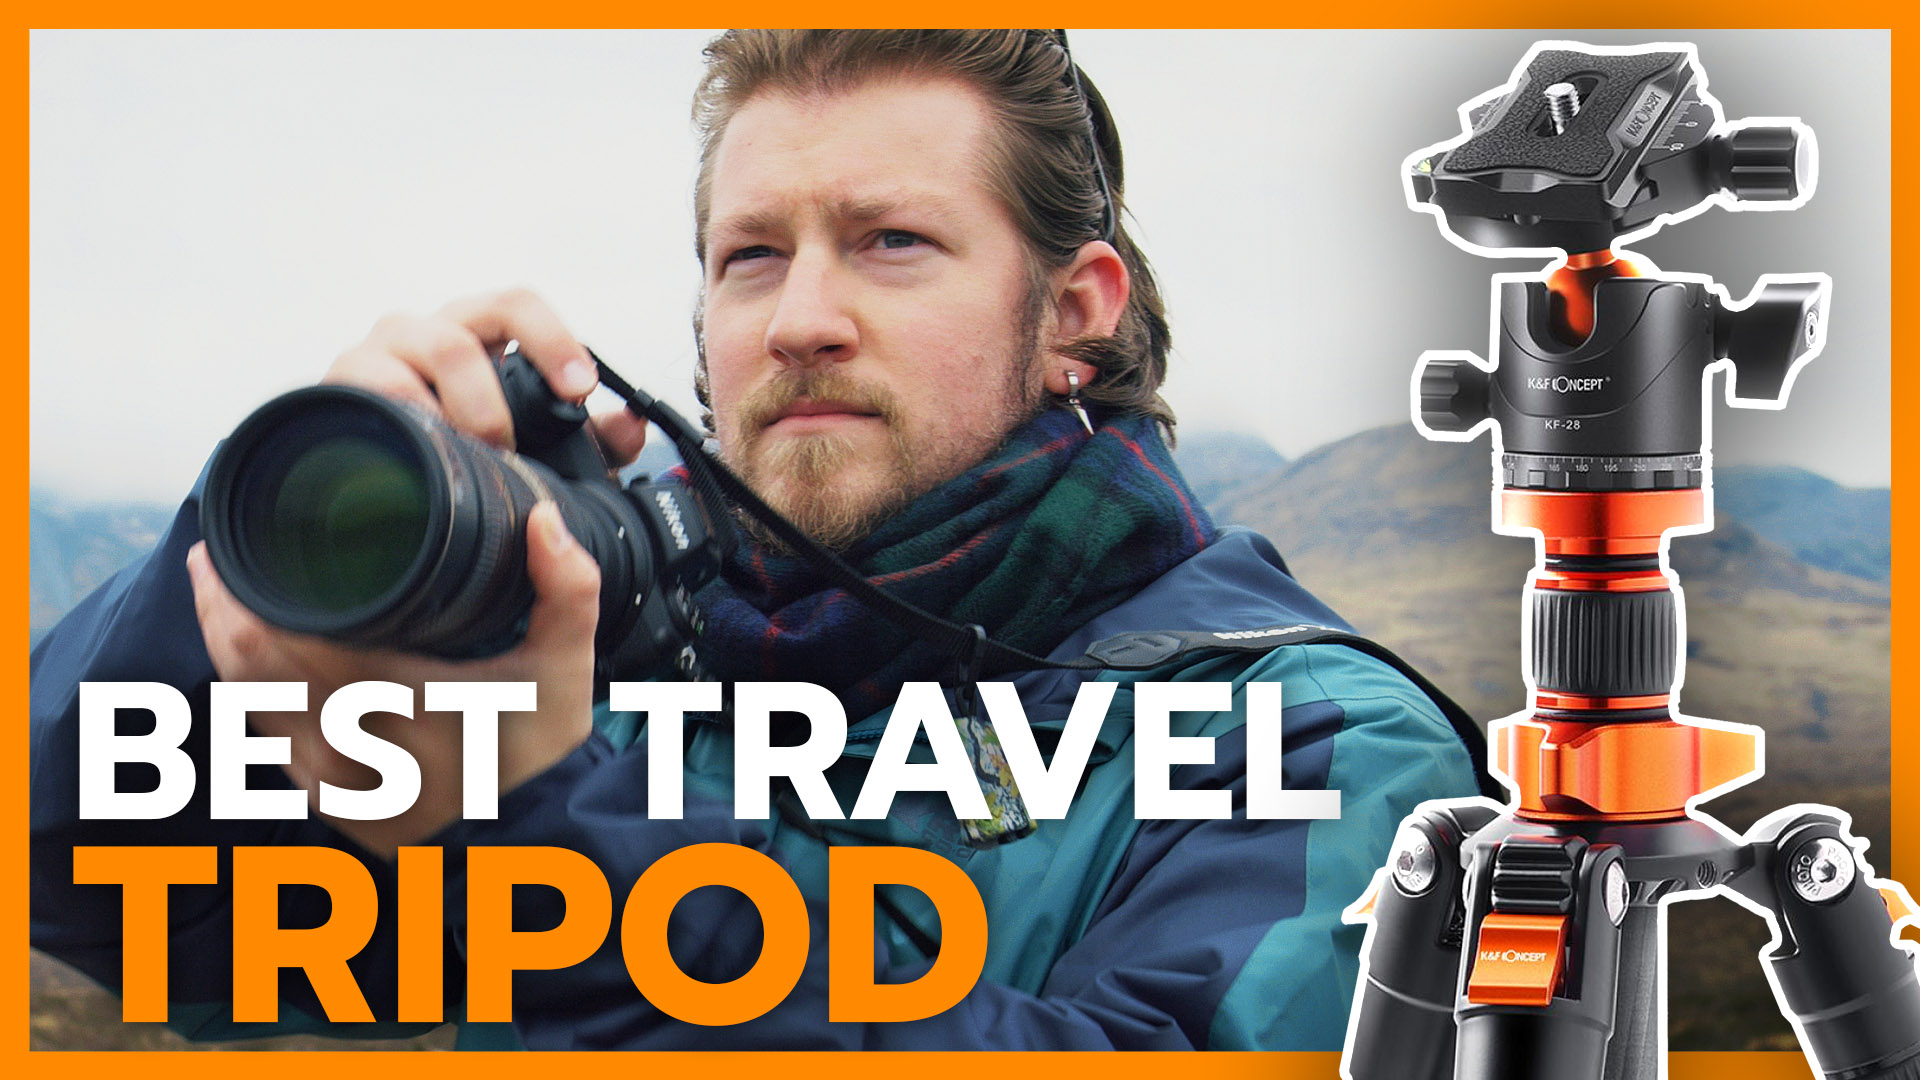 You are currently viewing K&F Concept D255C4 Tripod Review